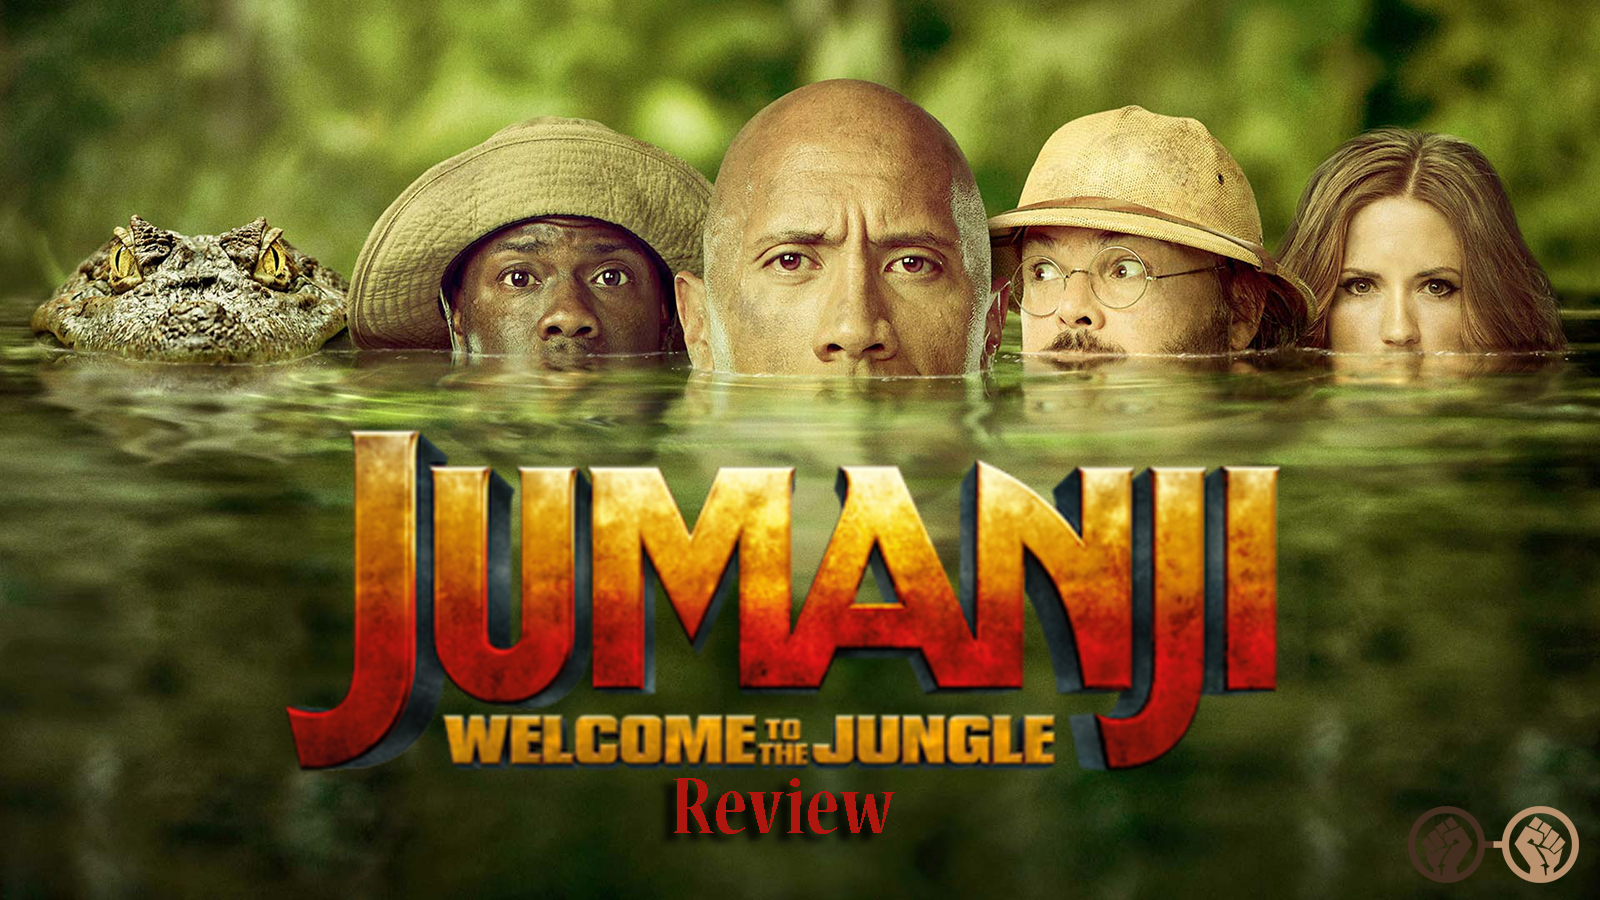 Jumanji: Welcome to the Jungle’: A Sequel That’s Not Really A Sequel – Spoiler-Free Review